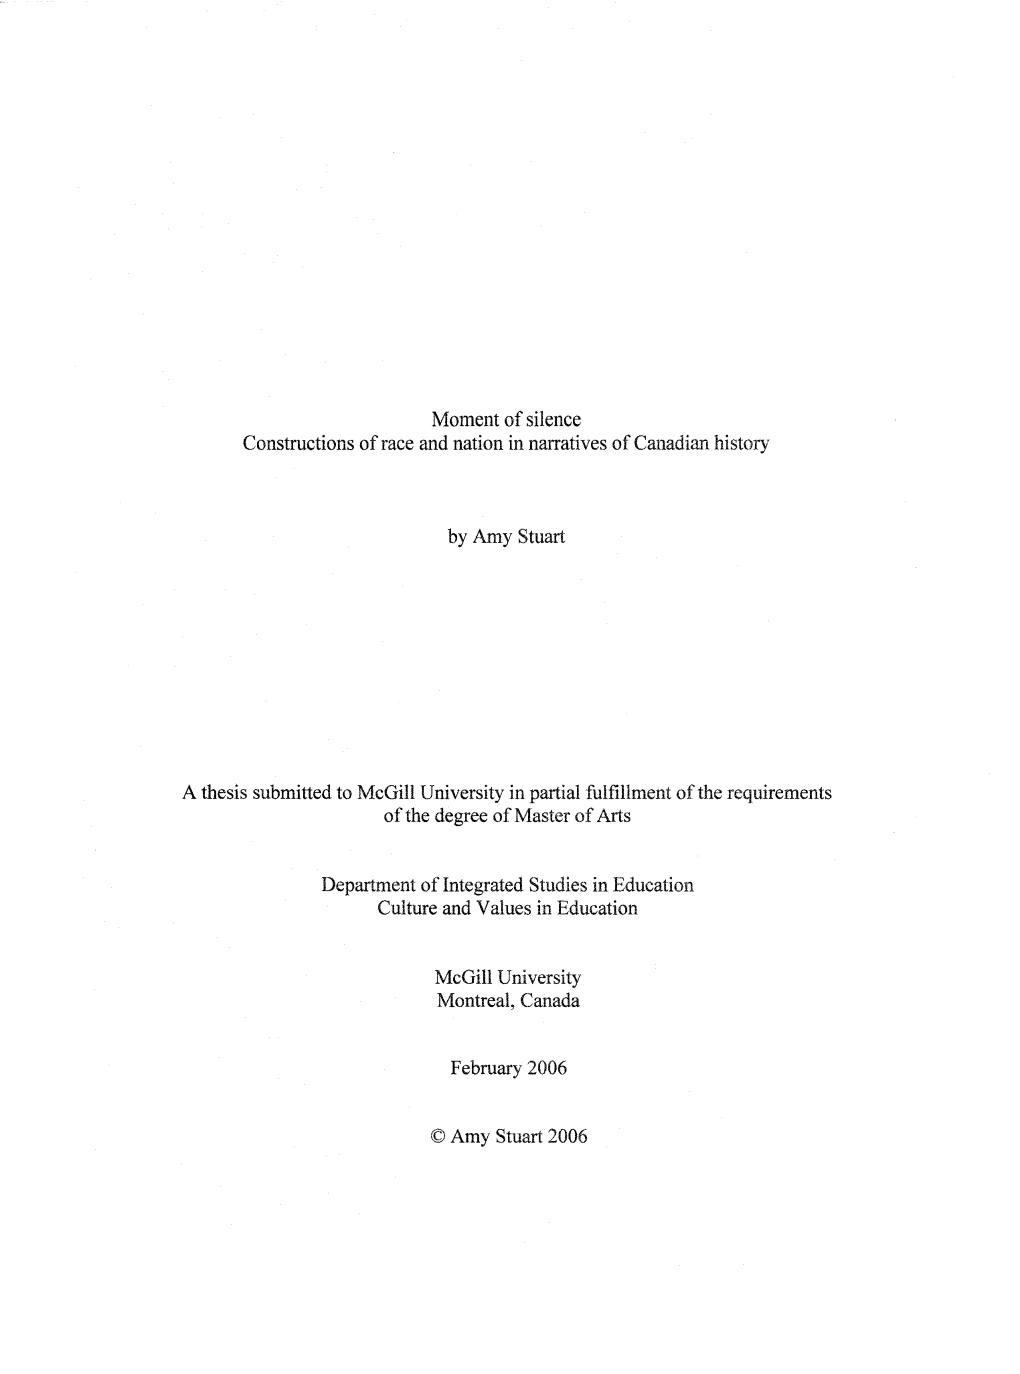 Moment of Silence Constructions of Race and Nation in Narratives of Canadian History by Amy Stuart a Thesis Submitted to Mc Gill